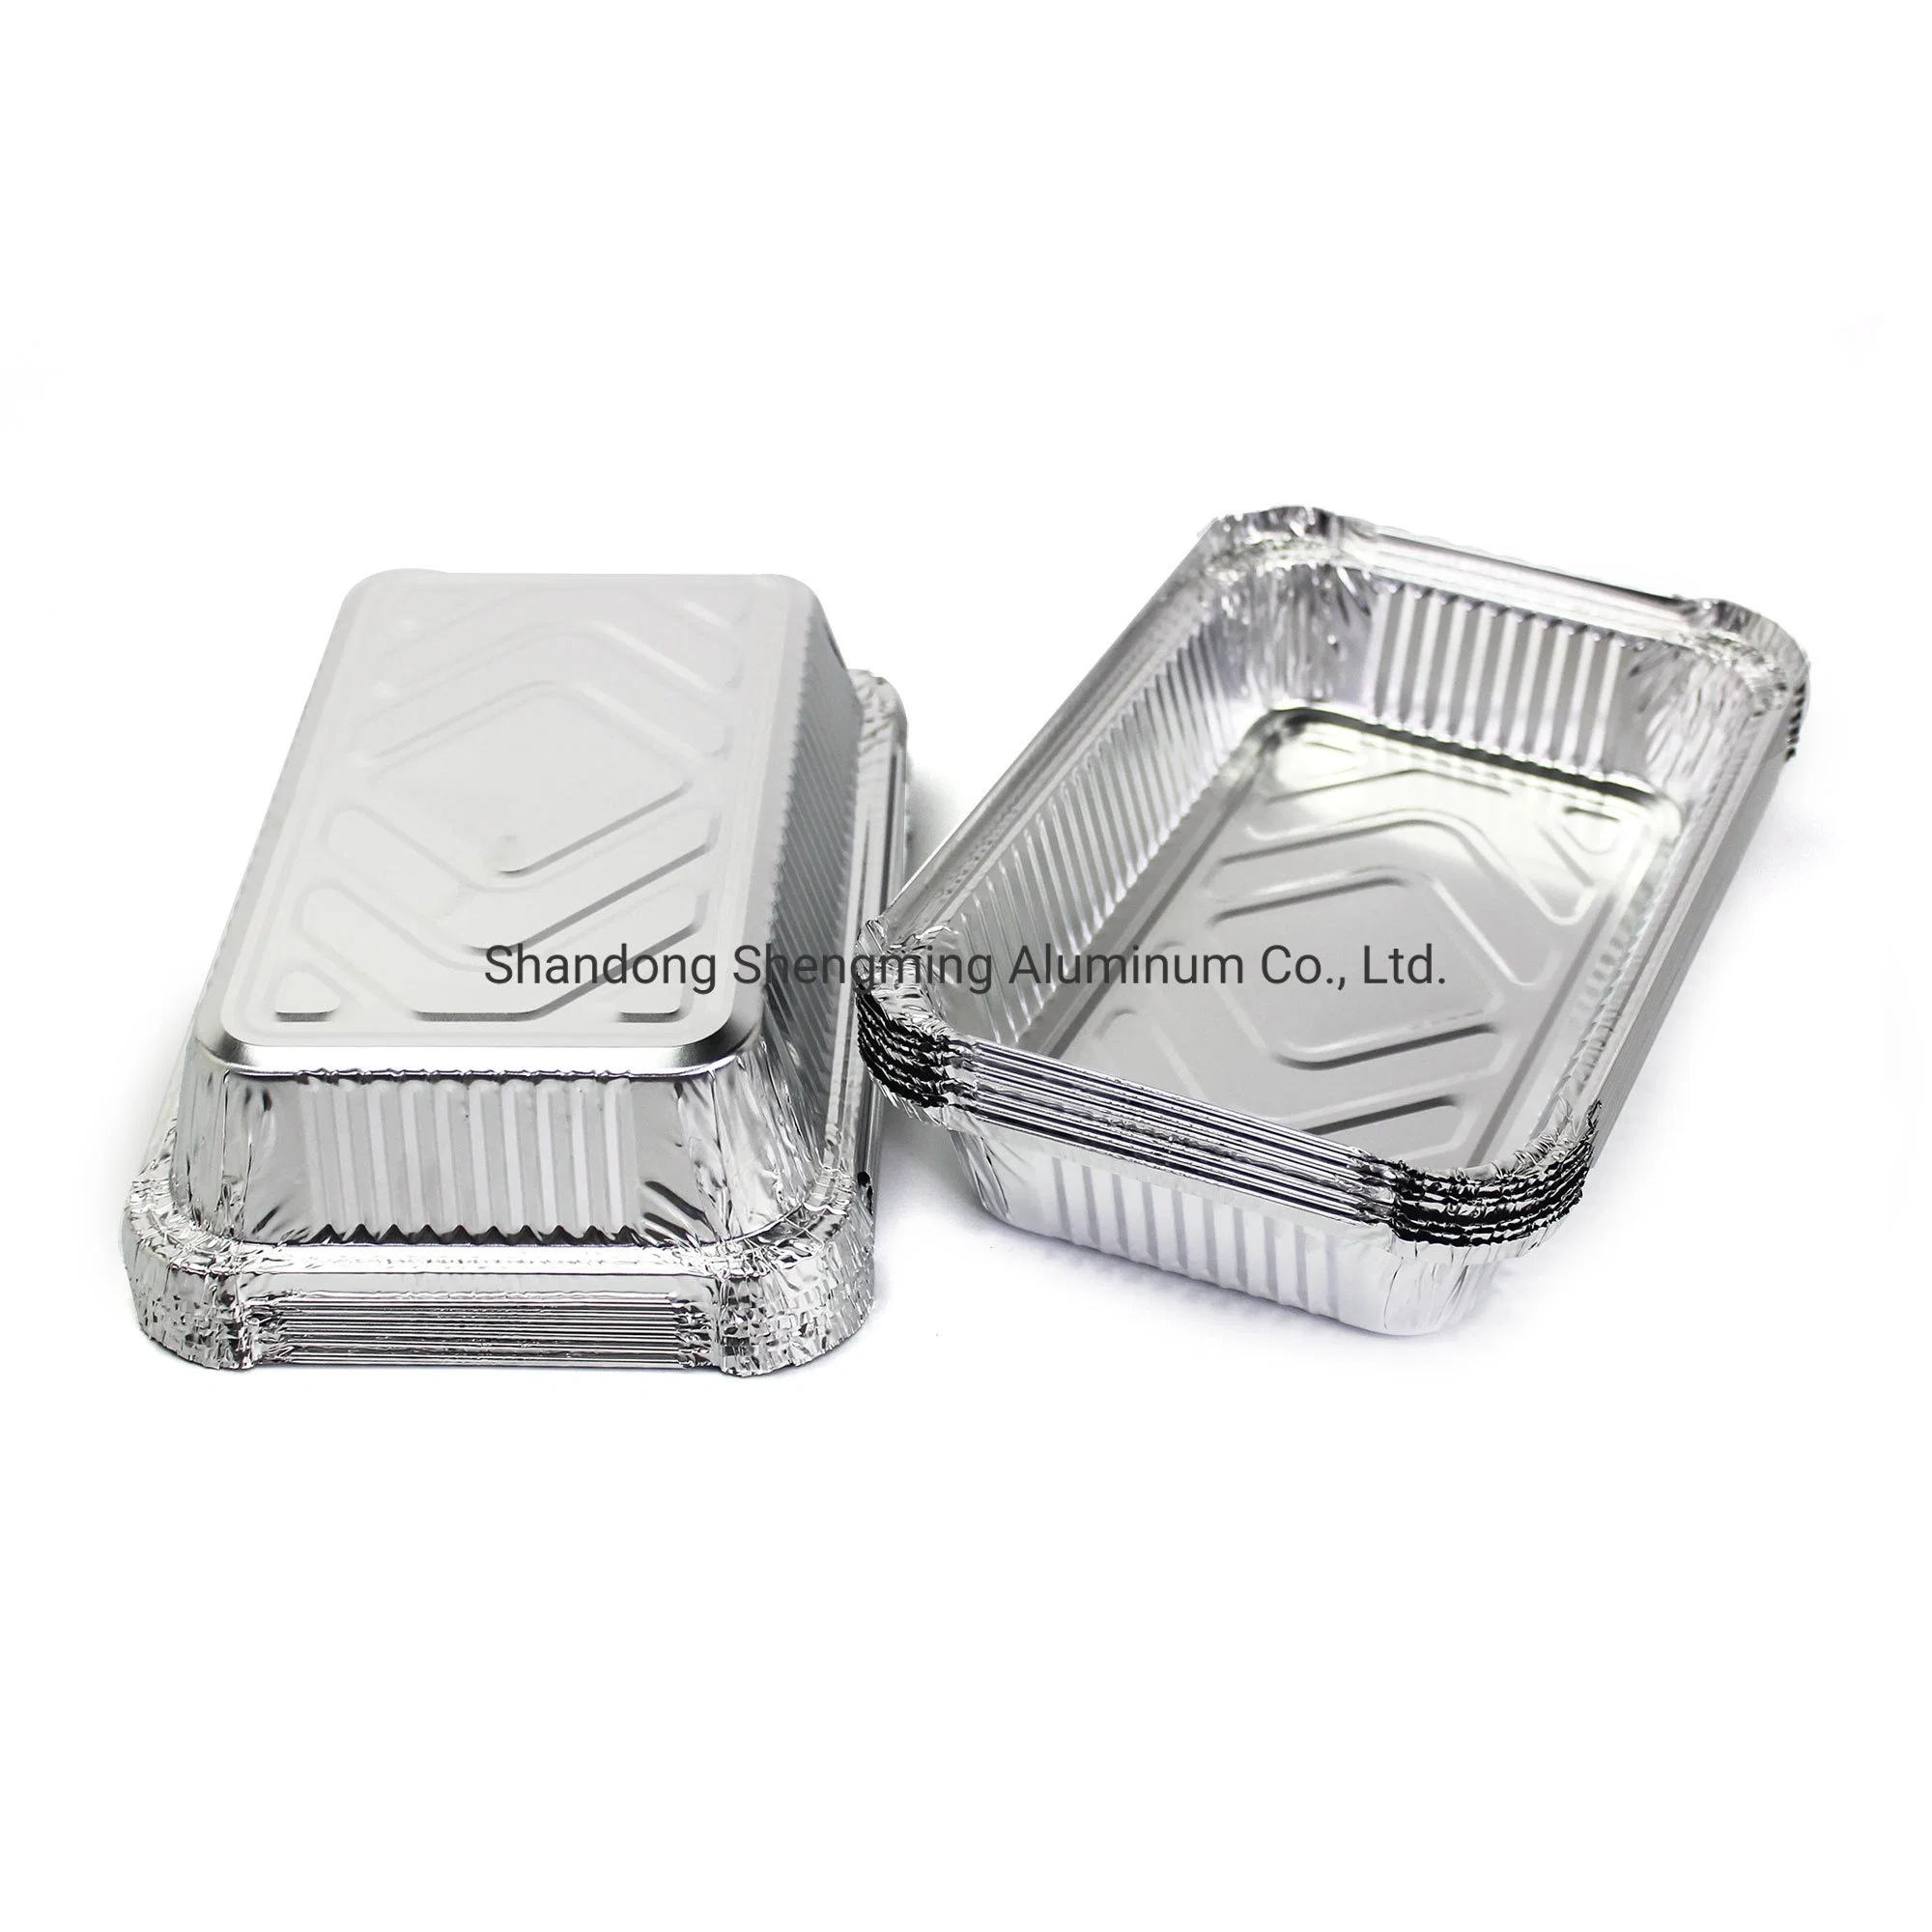 450ml Aluminium Container Foil Box for Food Packing